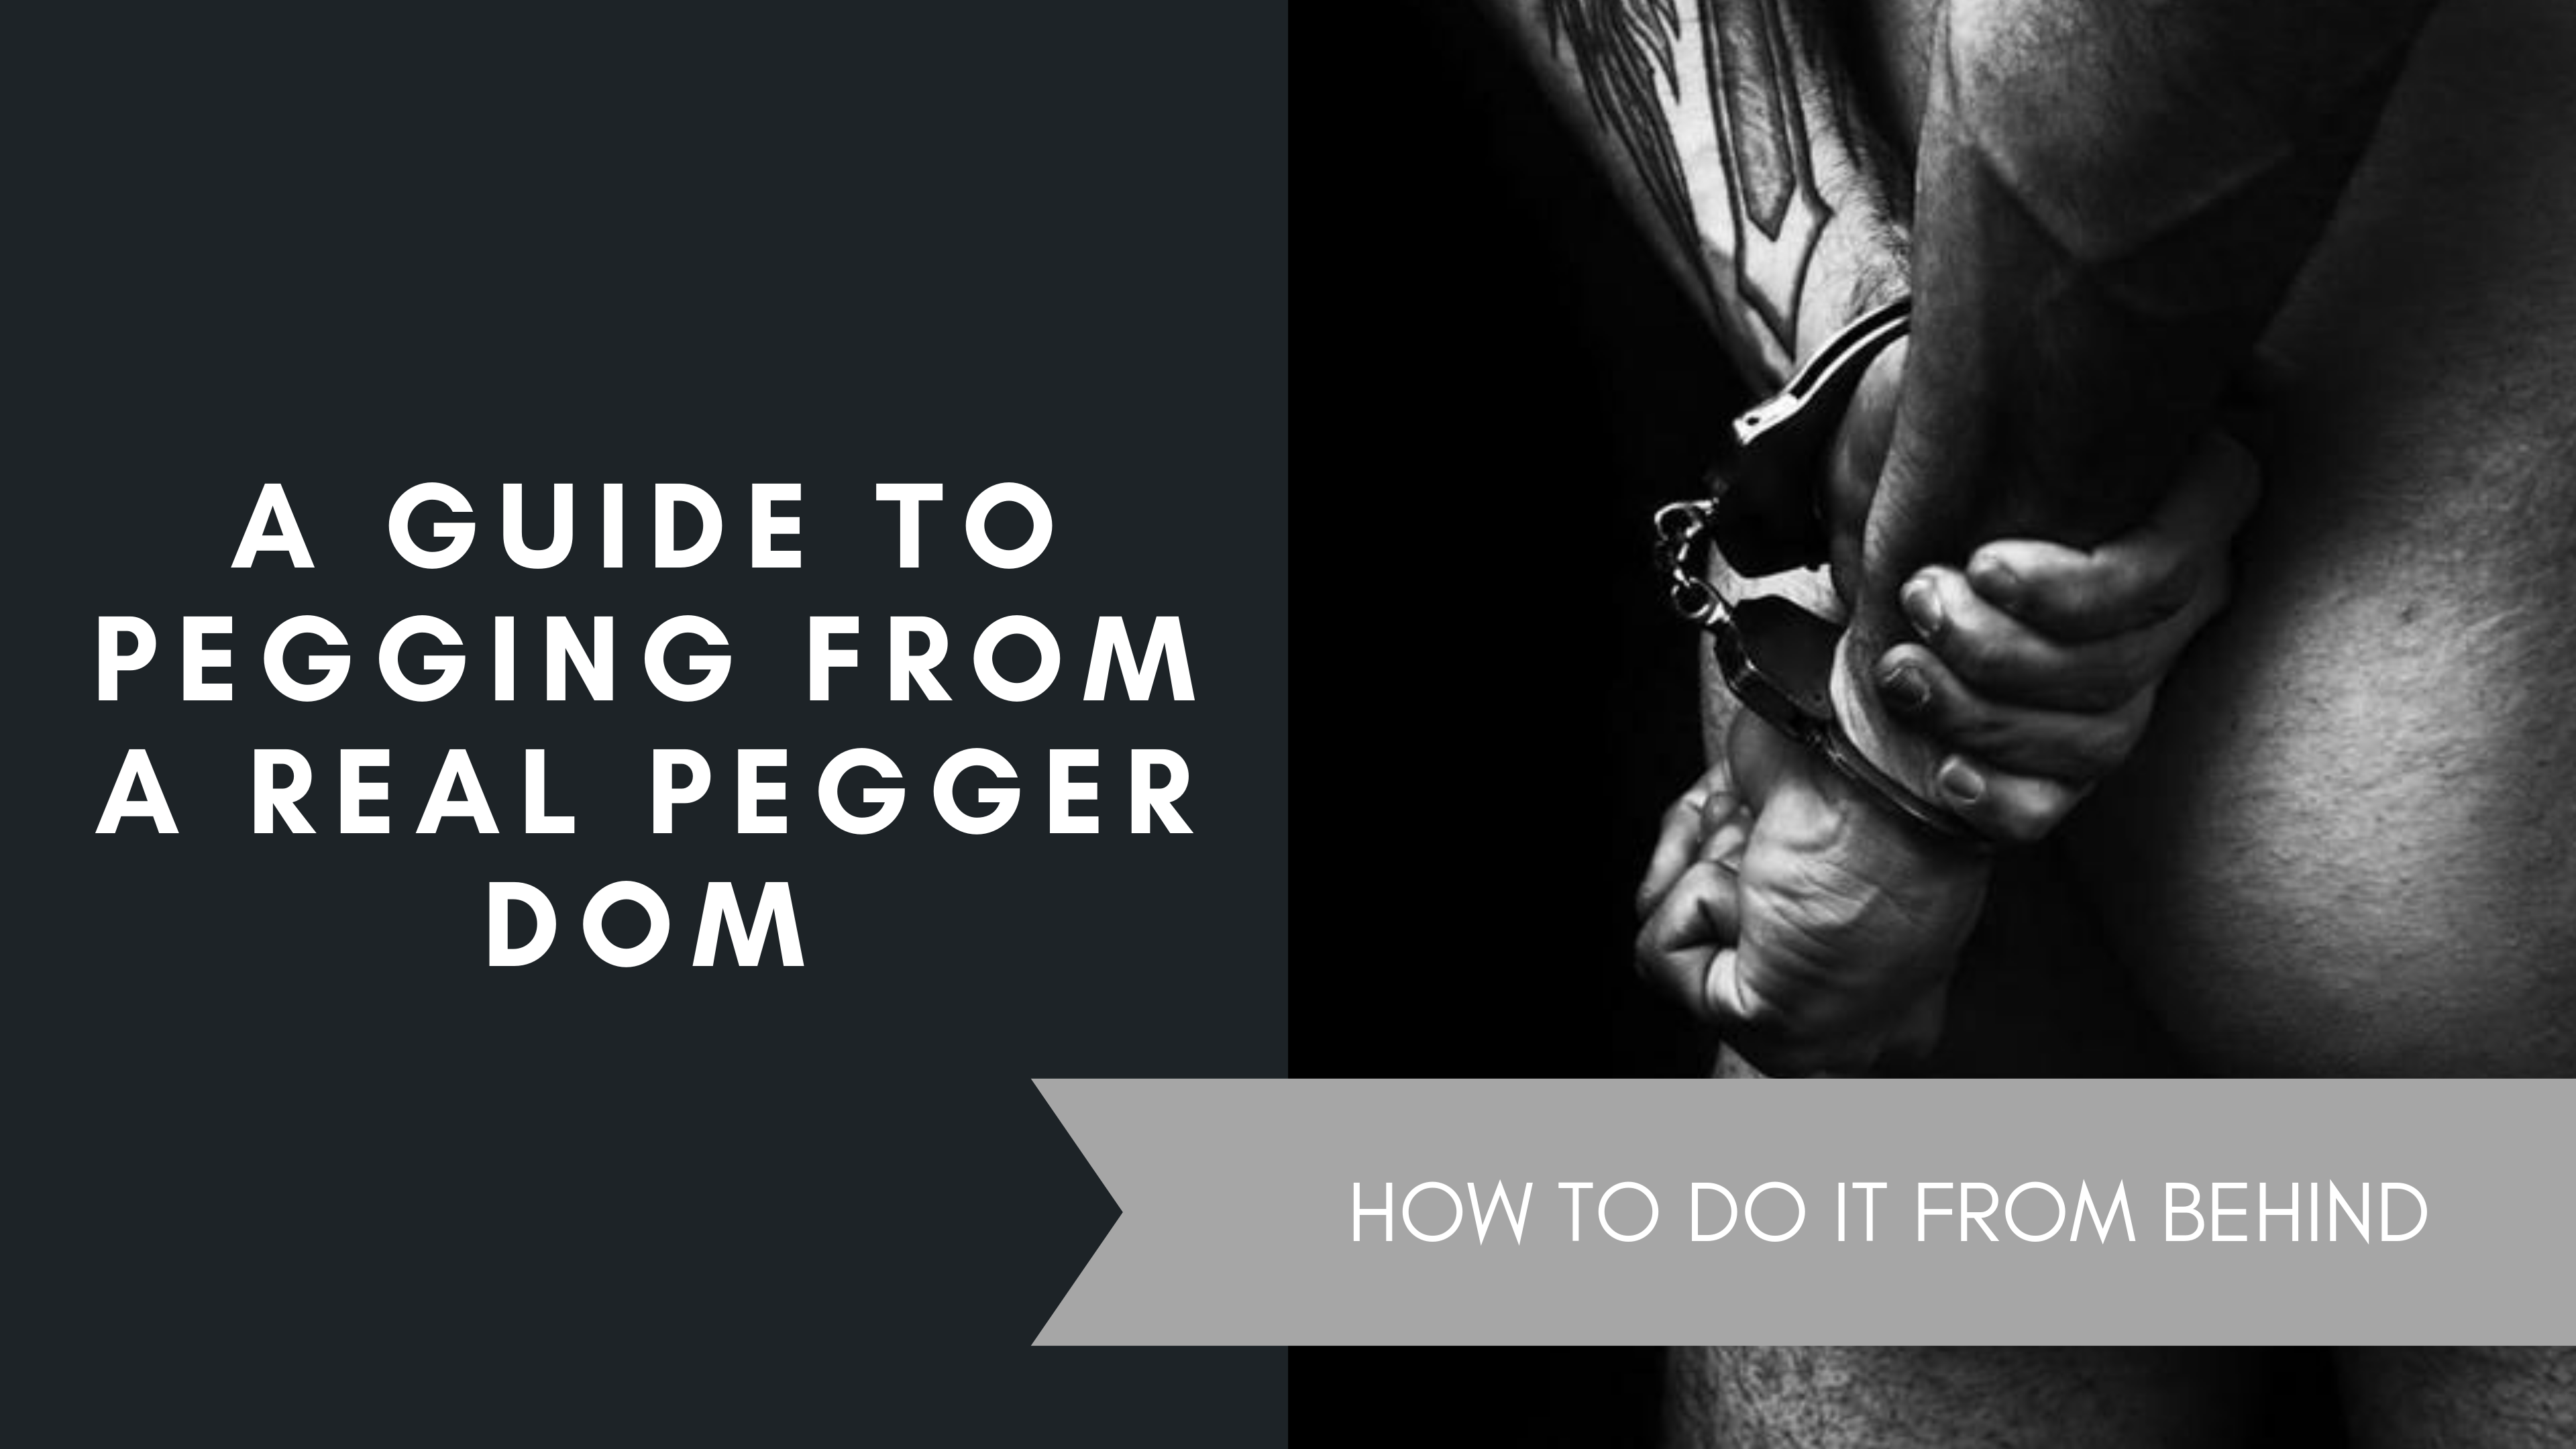 A Guide To Pegging From A Real Pegger Dom